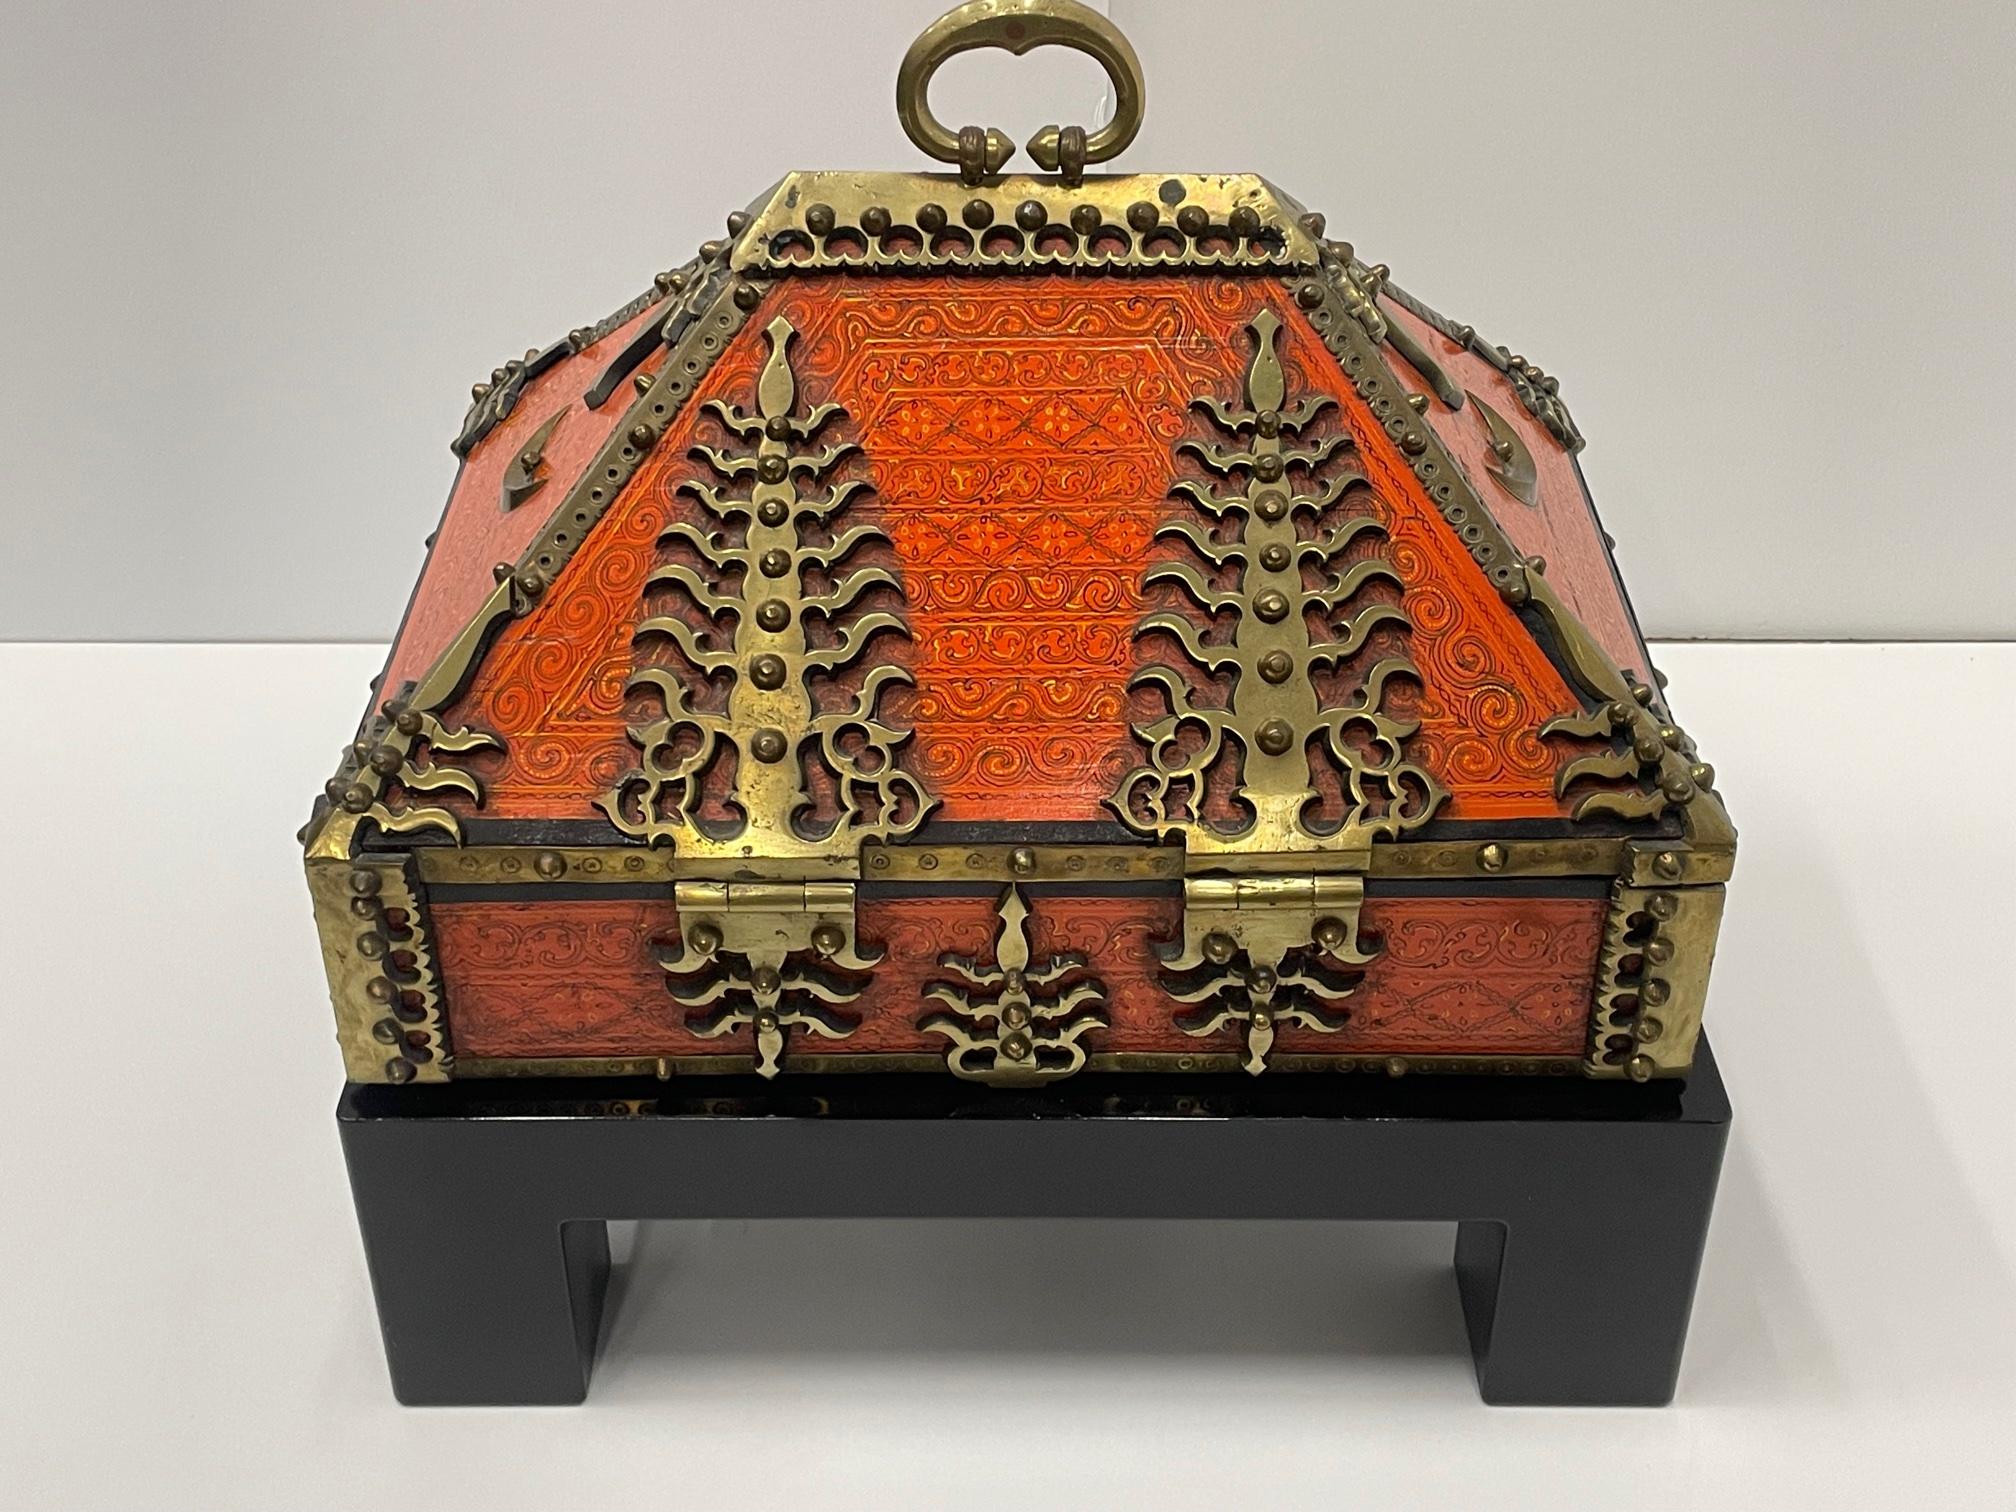 Extraordinary ornate red lacquered dowry box having unusual shape and amazing brass decoration and pen work. Original key included and an ebonized black custom stand.